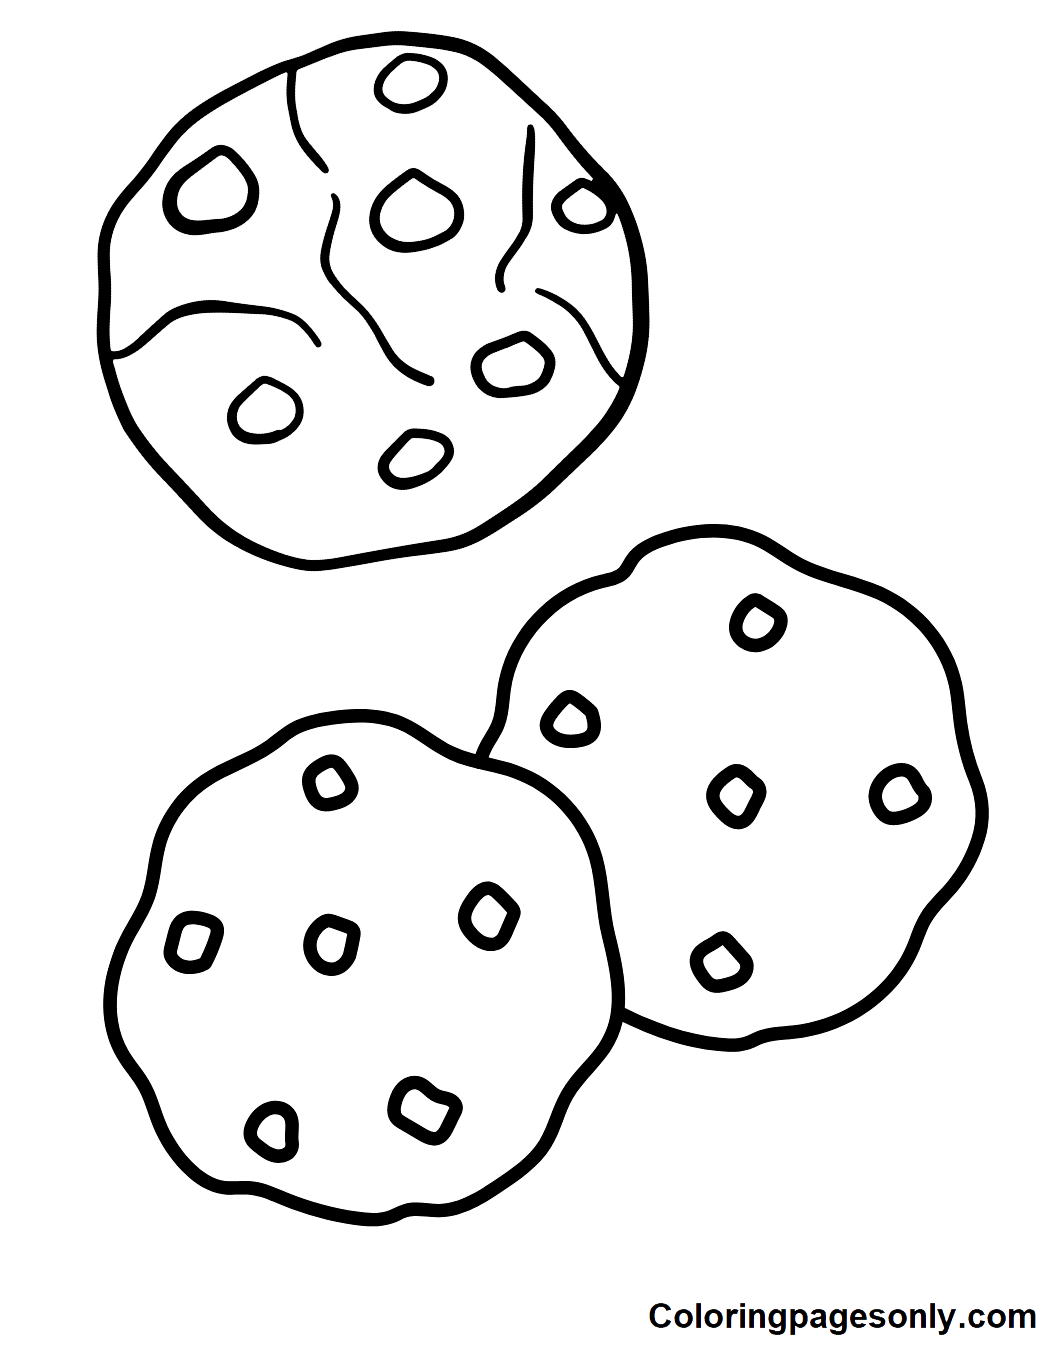 Cookie for Kids Coloring Pages